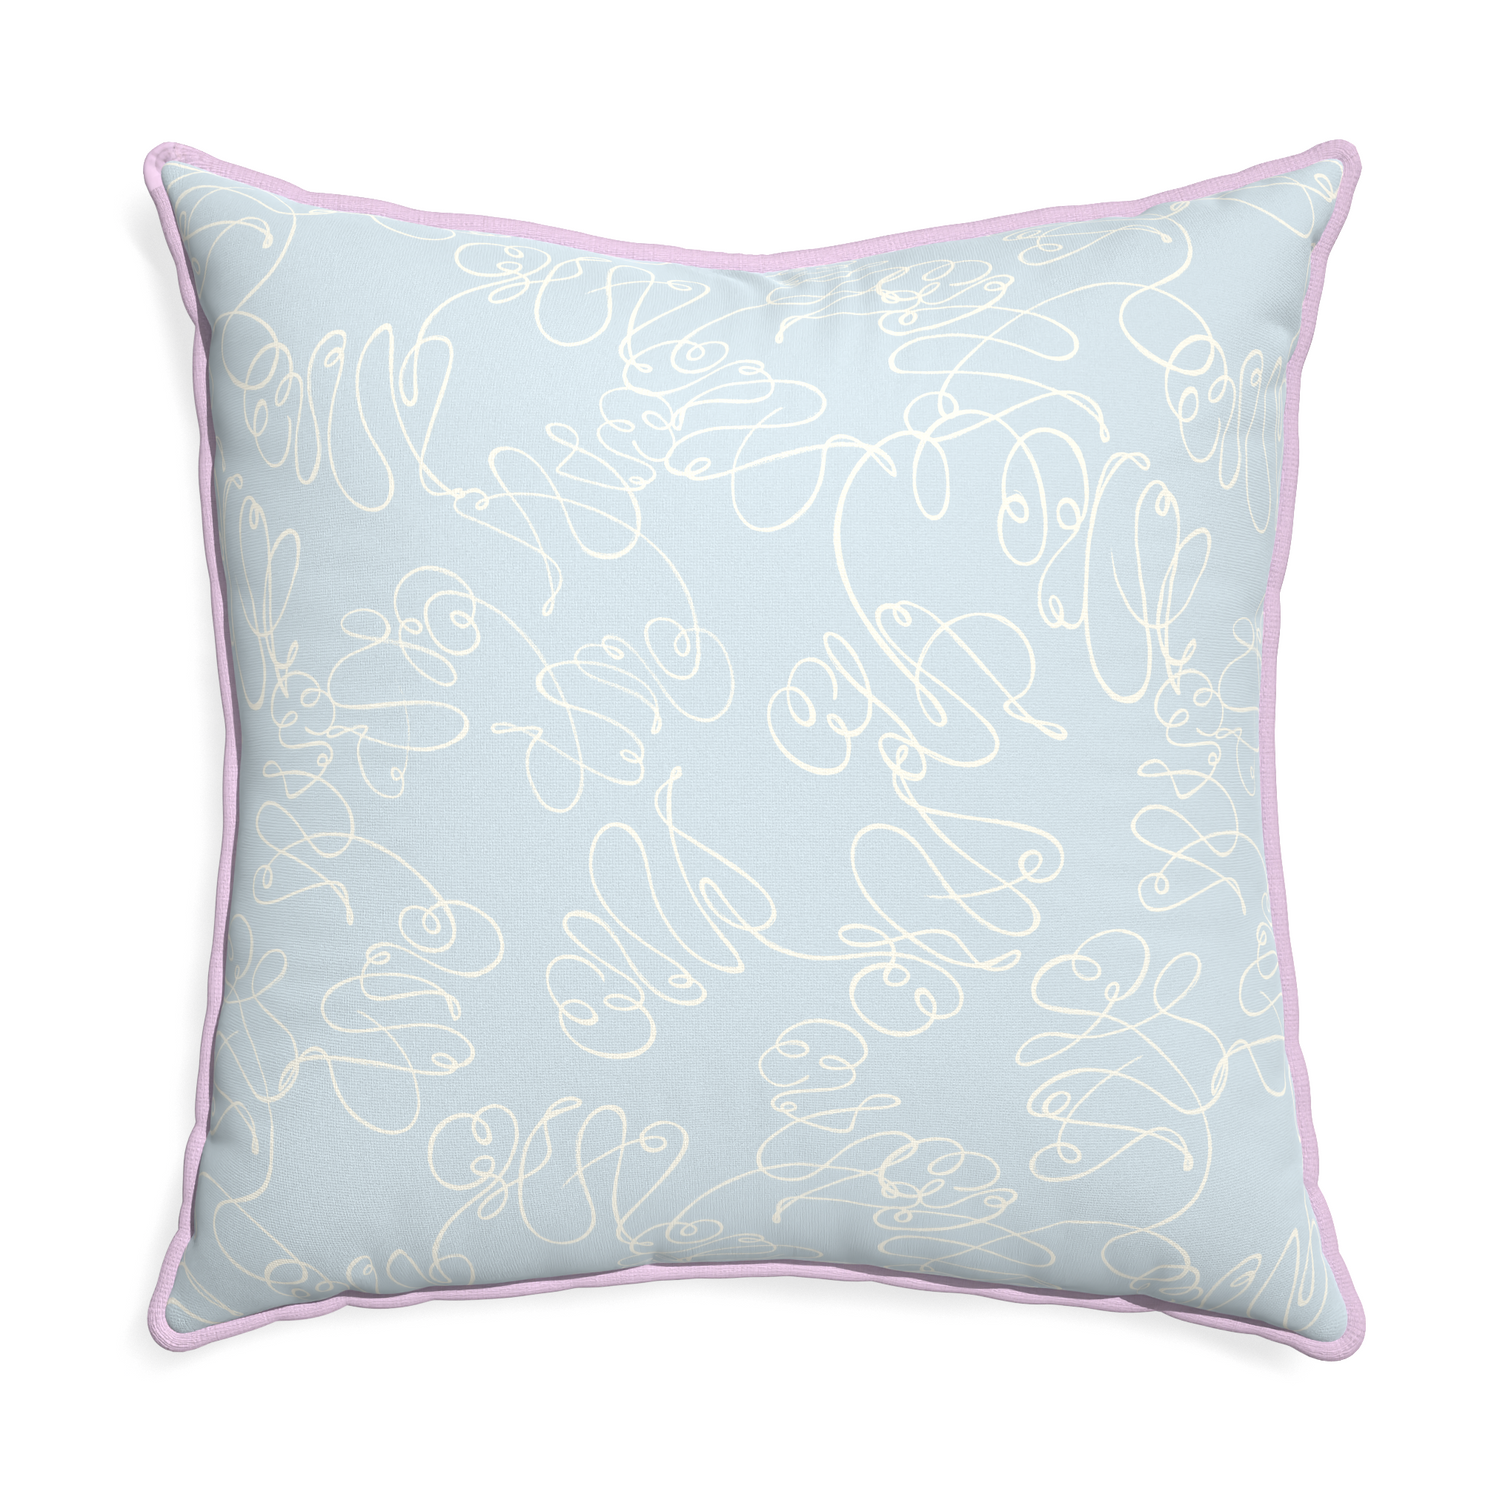 Euro-sham mirabella custom powder blue abstractpillow with l piping on white background